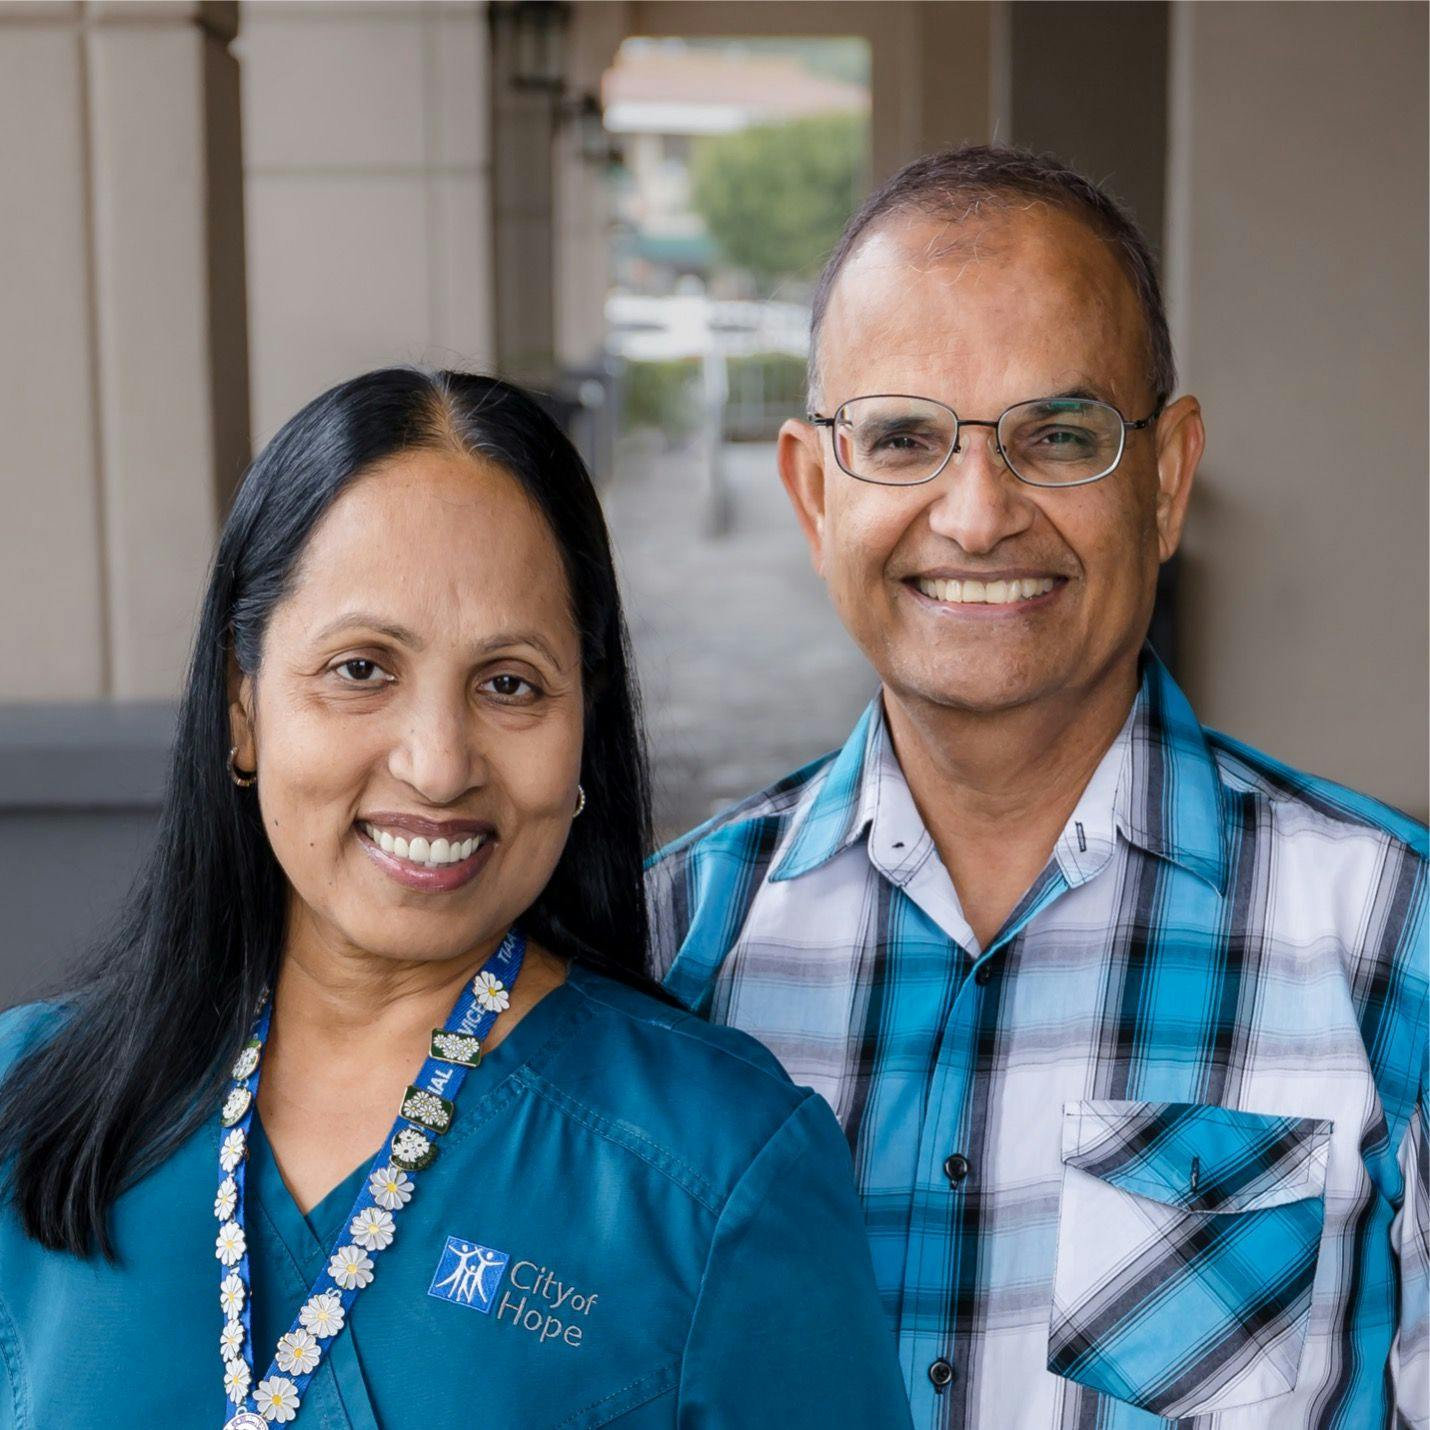 From left: Sobha Akkar, B.S.N., RN, OCN, an oncology nurse in teal scrubs, wearing a lanyard filled with daisy pins and Narayan Ray Akkar, a man in a blue and white plaid shirt, wearing glasses. both are smiling at the camera |   Photos by Alyssa Stefek